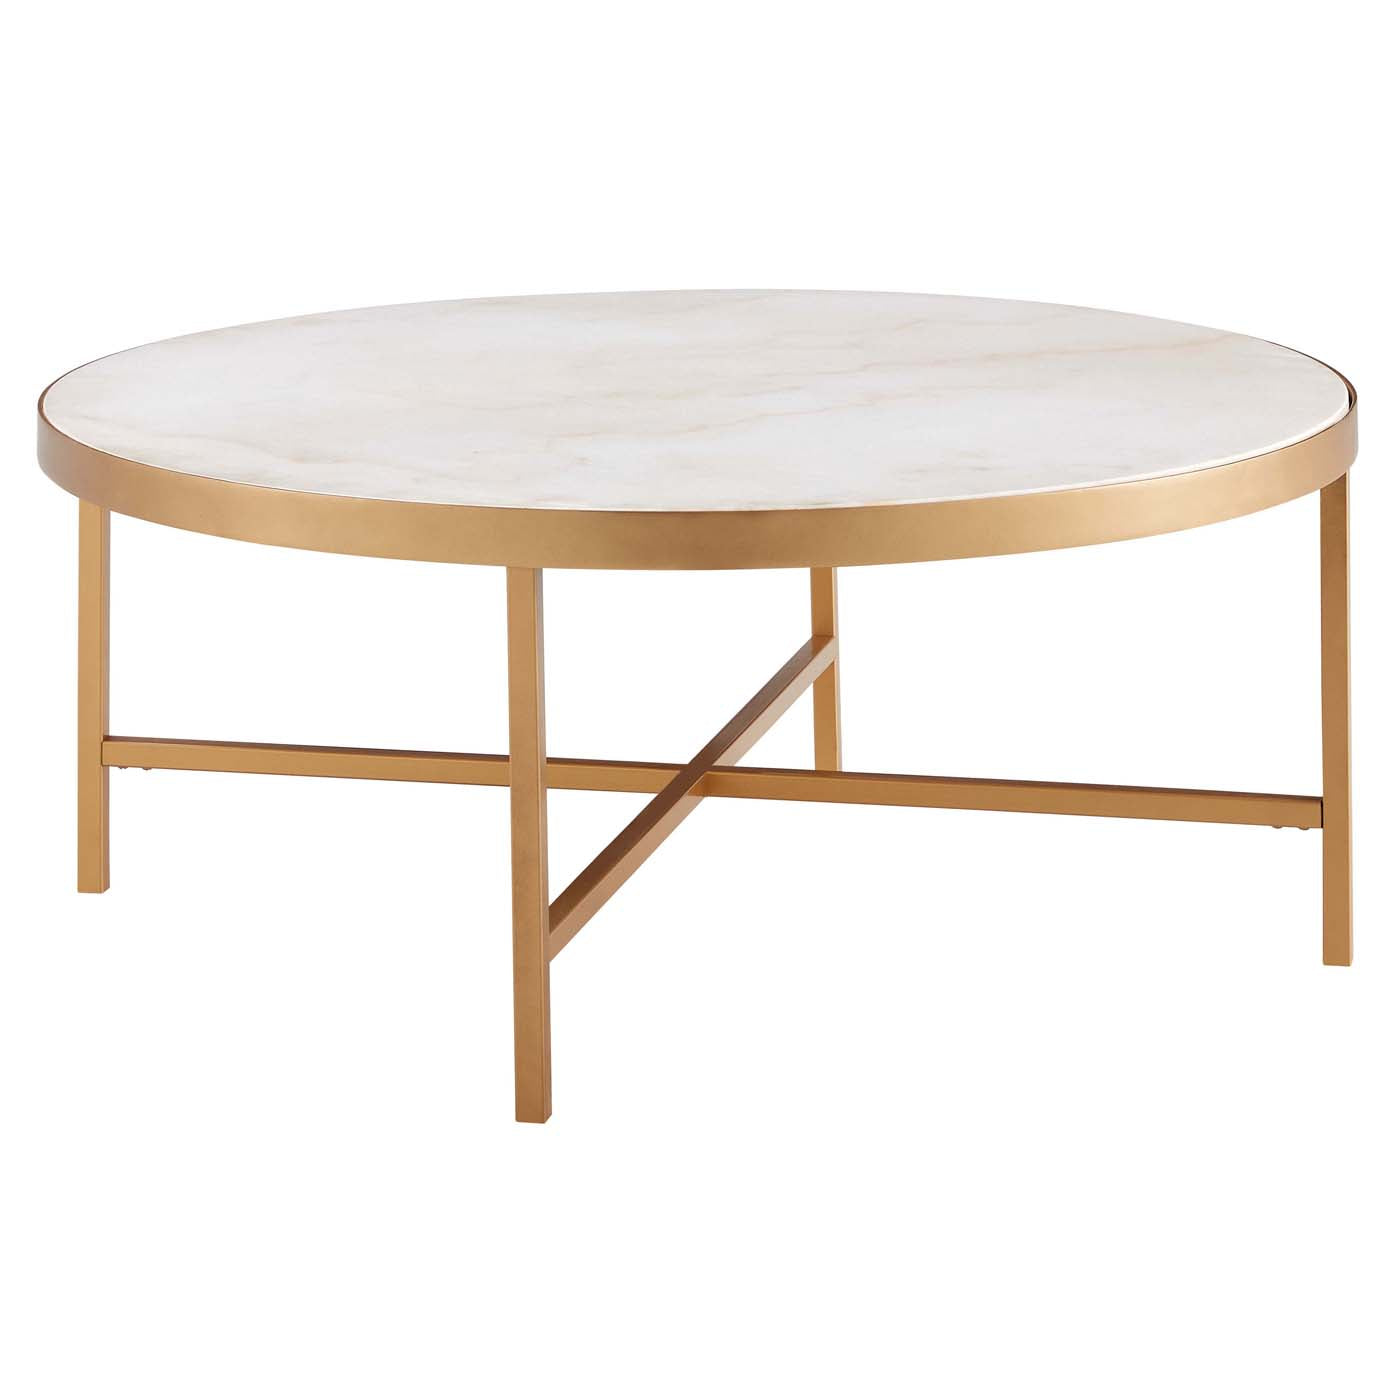 Safavieh Couture Caralyn Round Marble Coffee Table